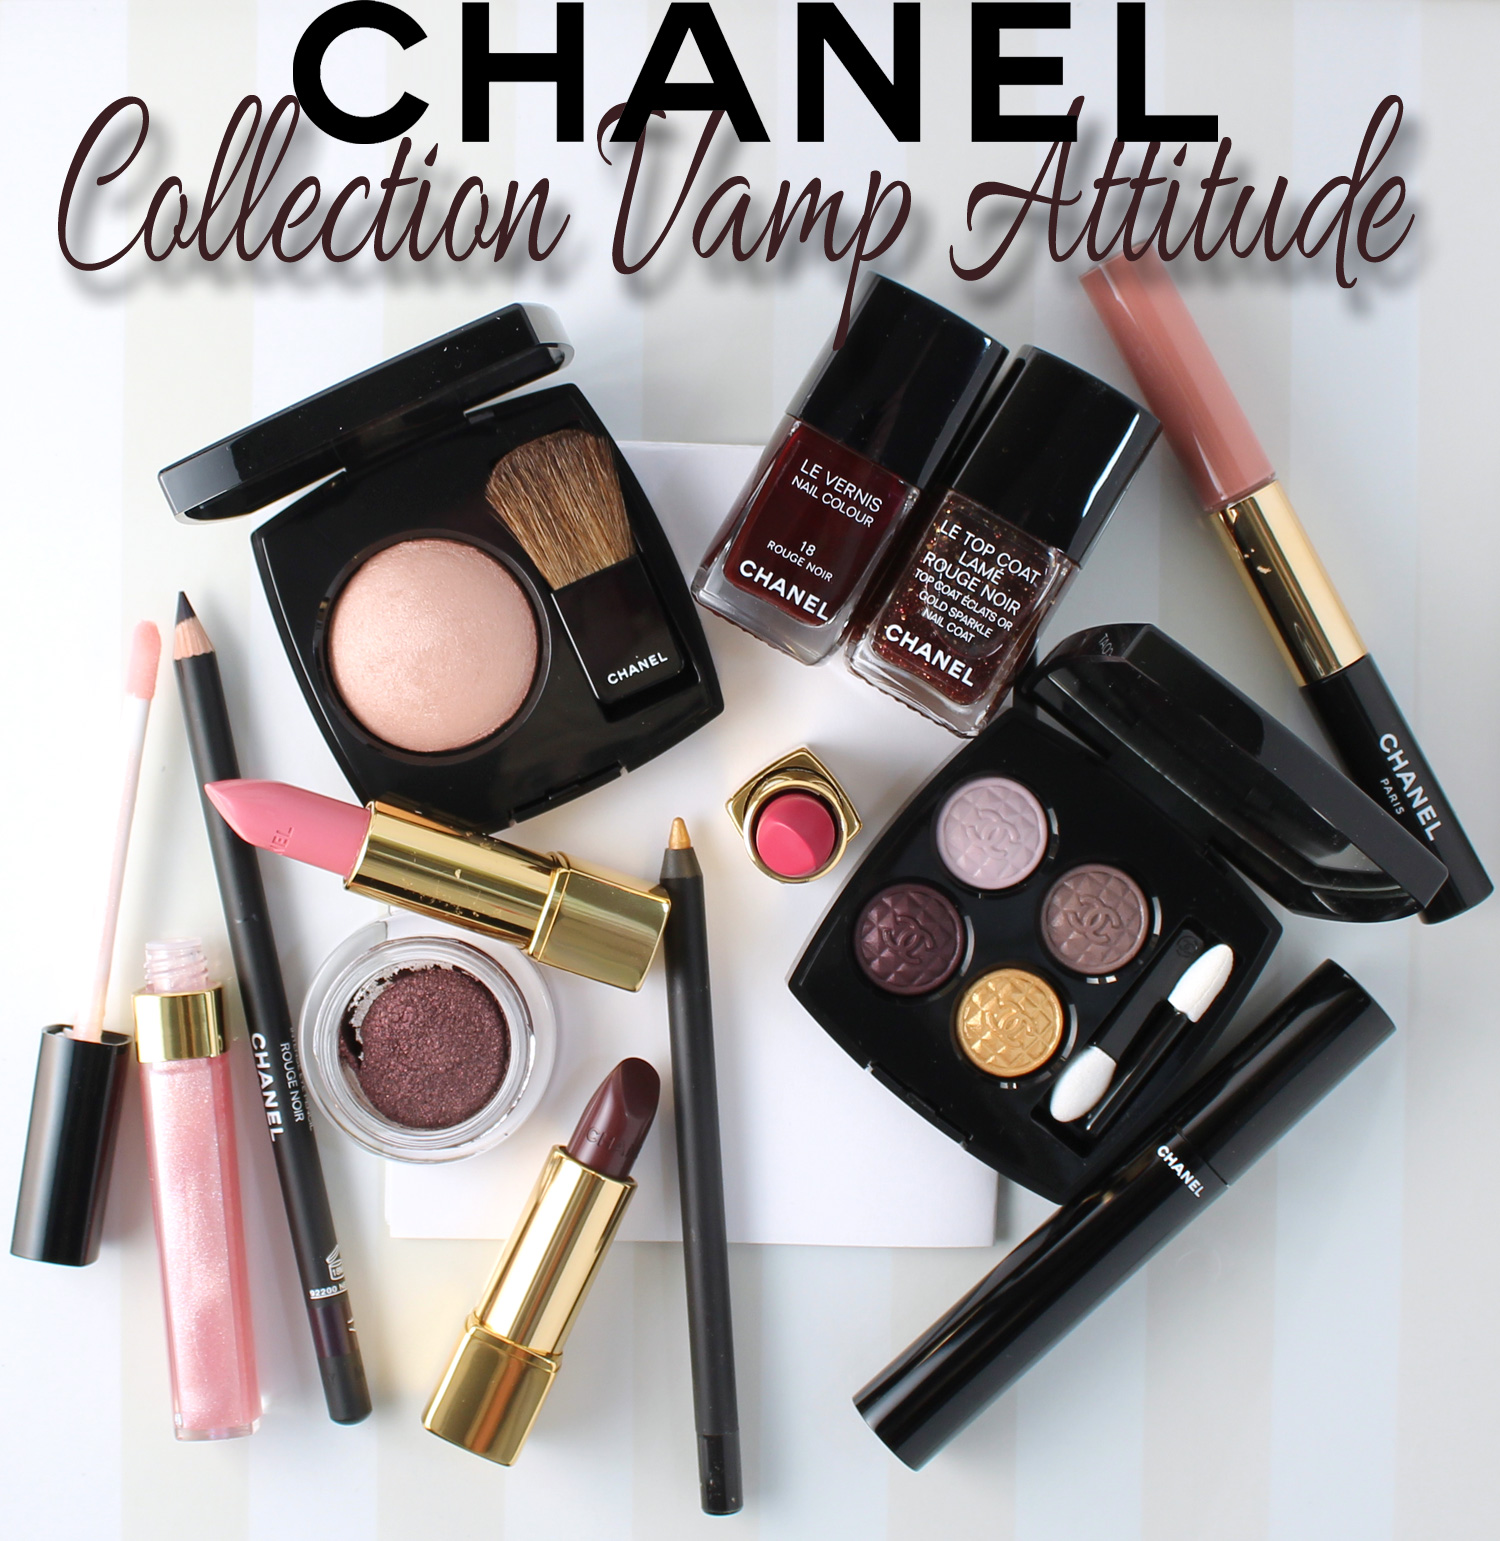 Chanel Holiday 2015 Nail Collection Vamp, Rouge Noir, Lame Rouge Noir 